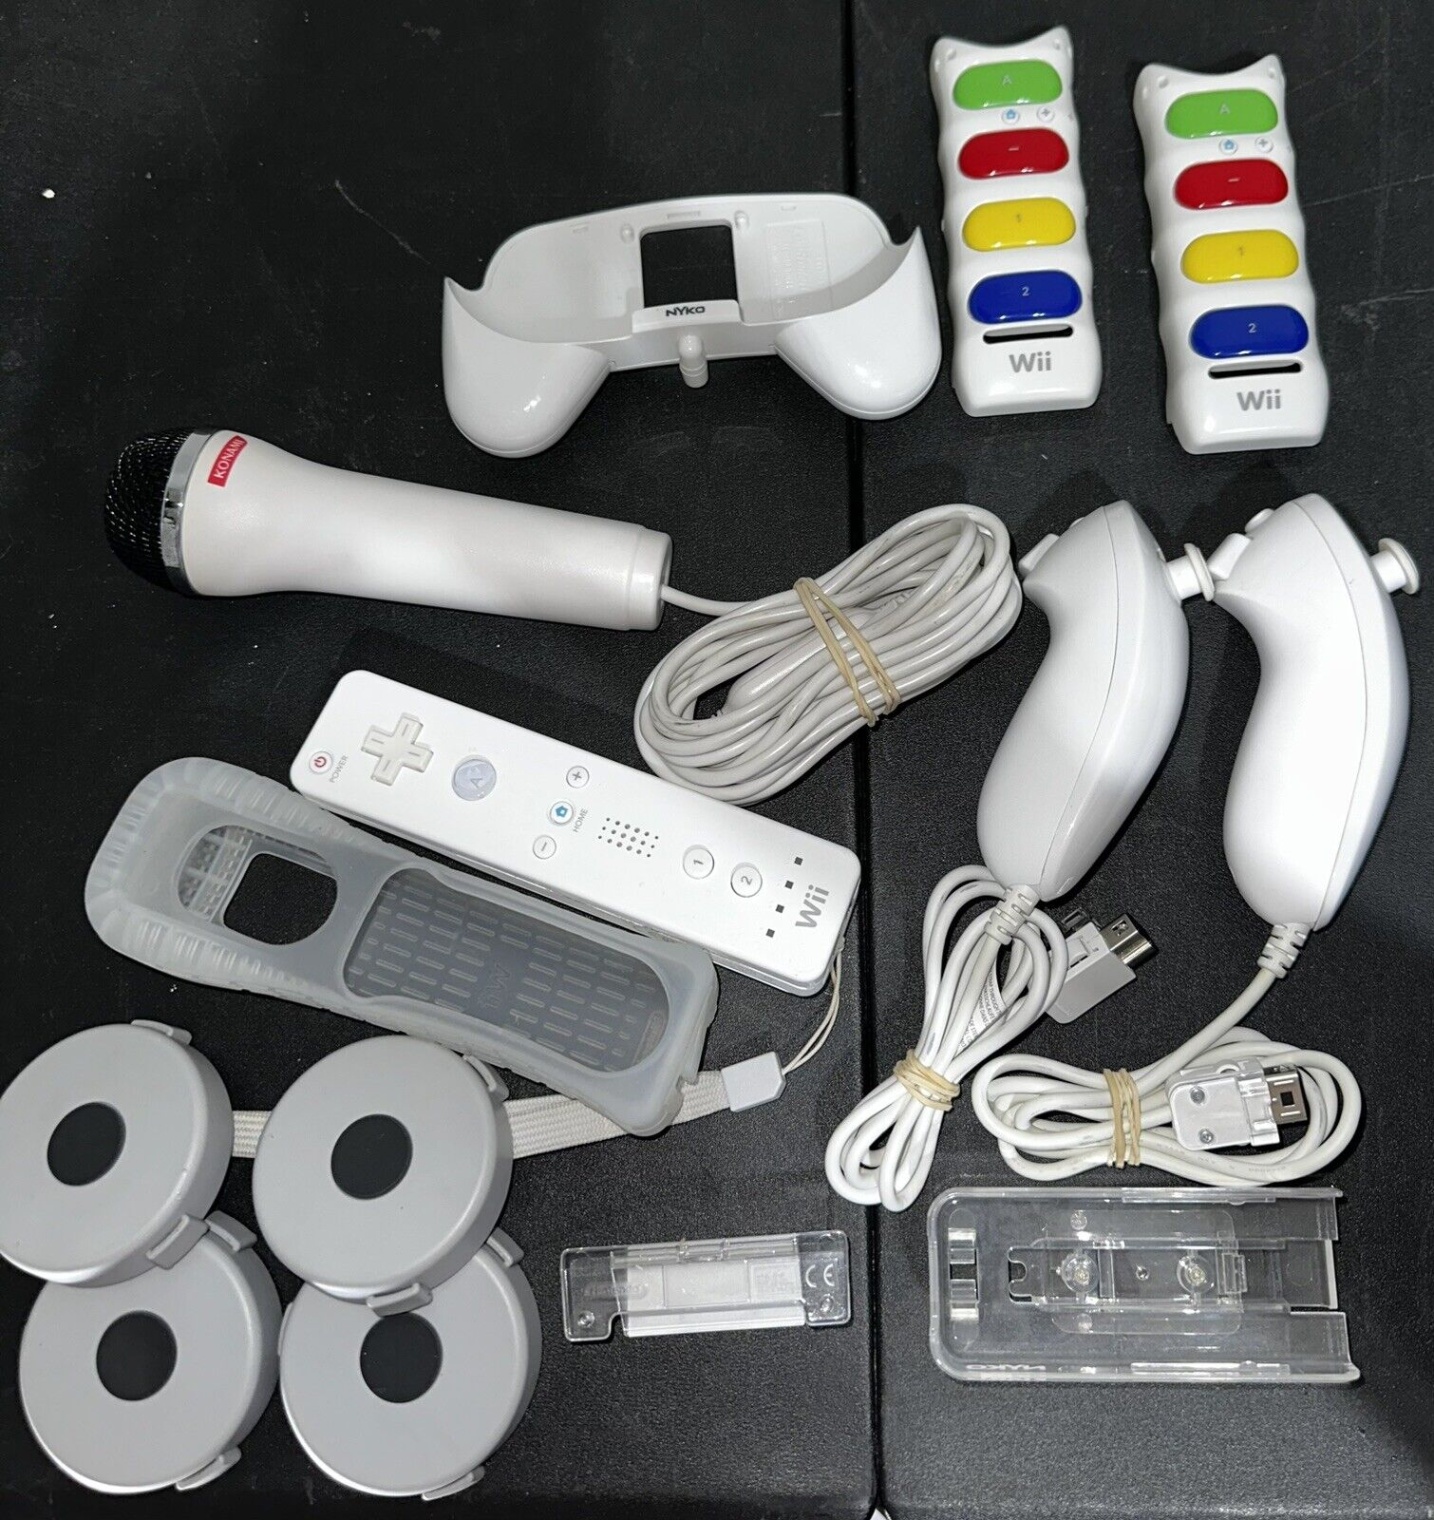 Level Up Your Gaming Experience With Must-have Wii Accessories!